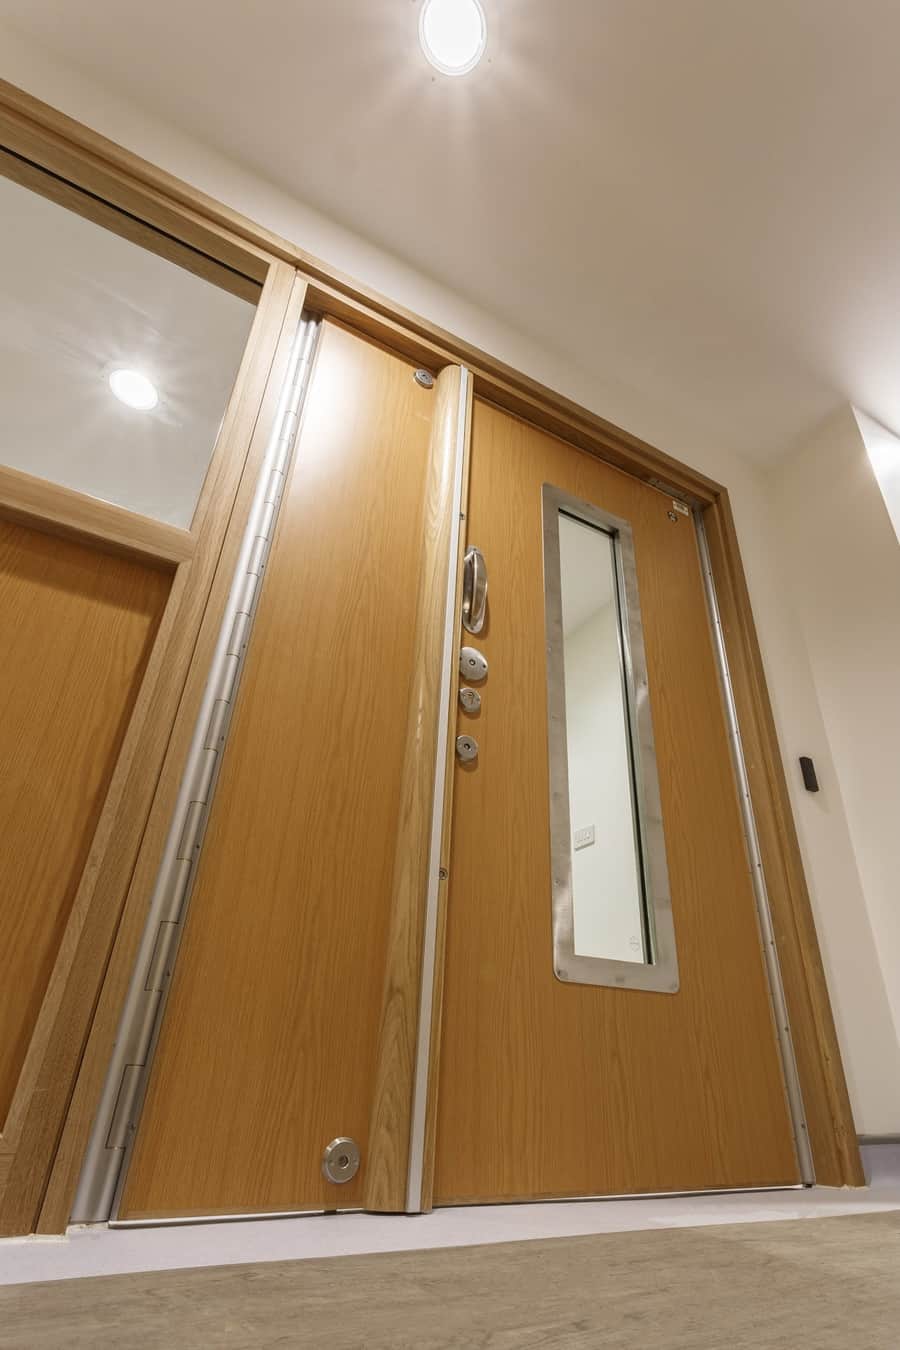  Client issue picture of the door taken on the Platypo Pro 